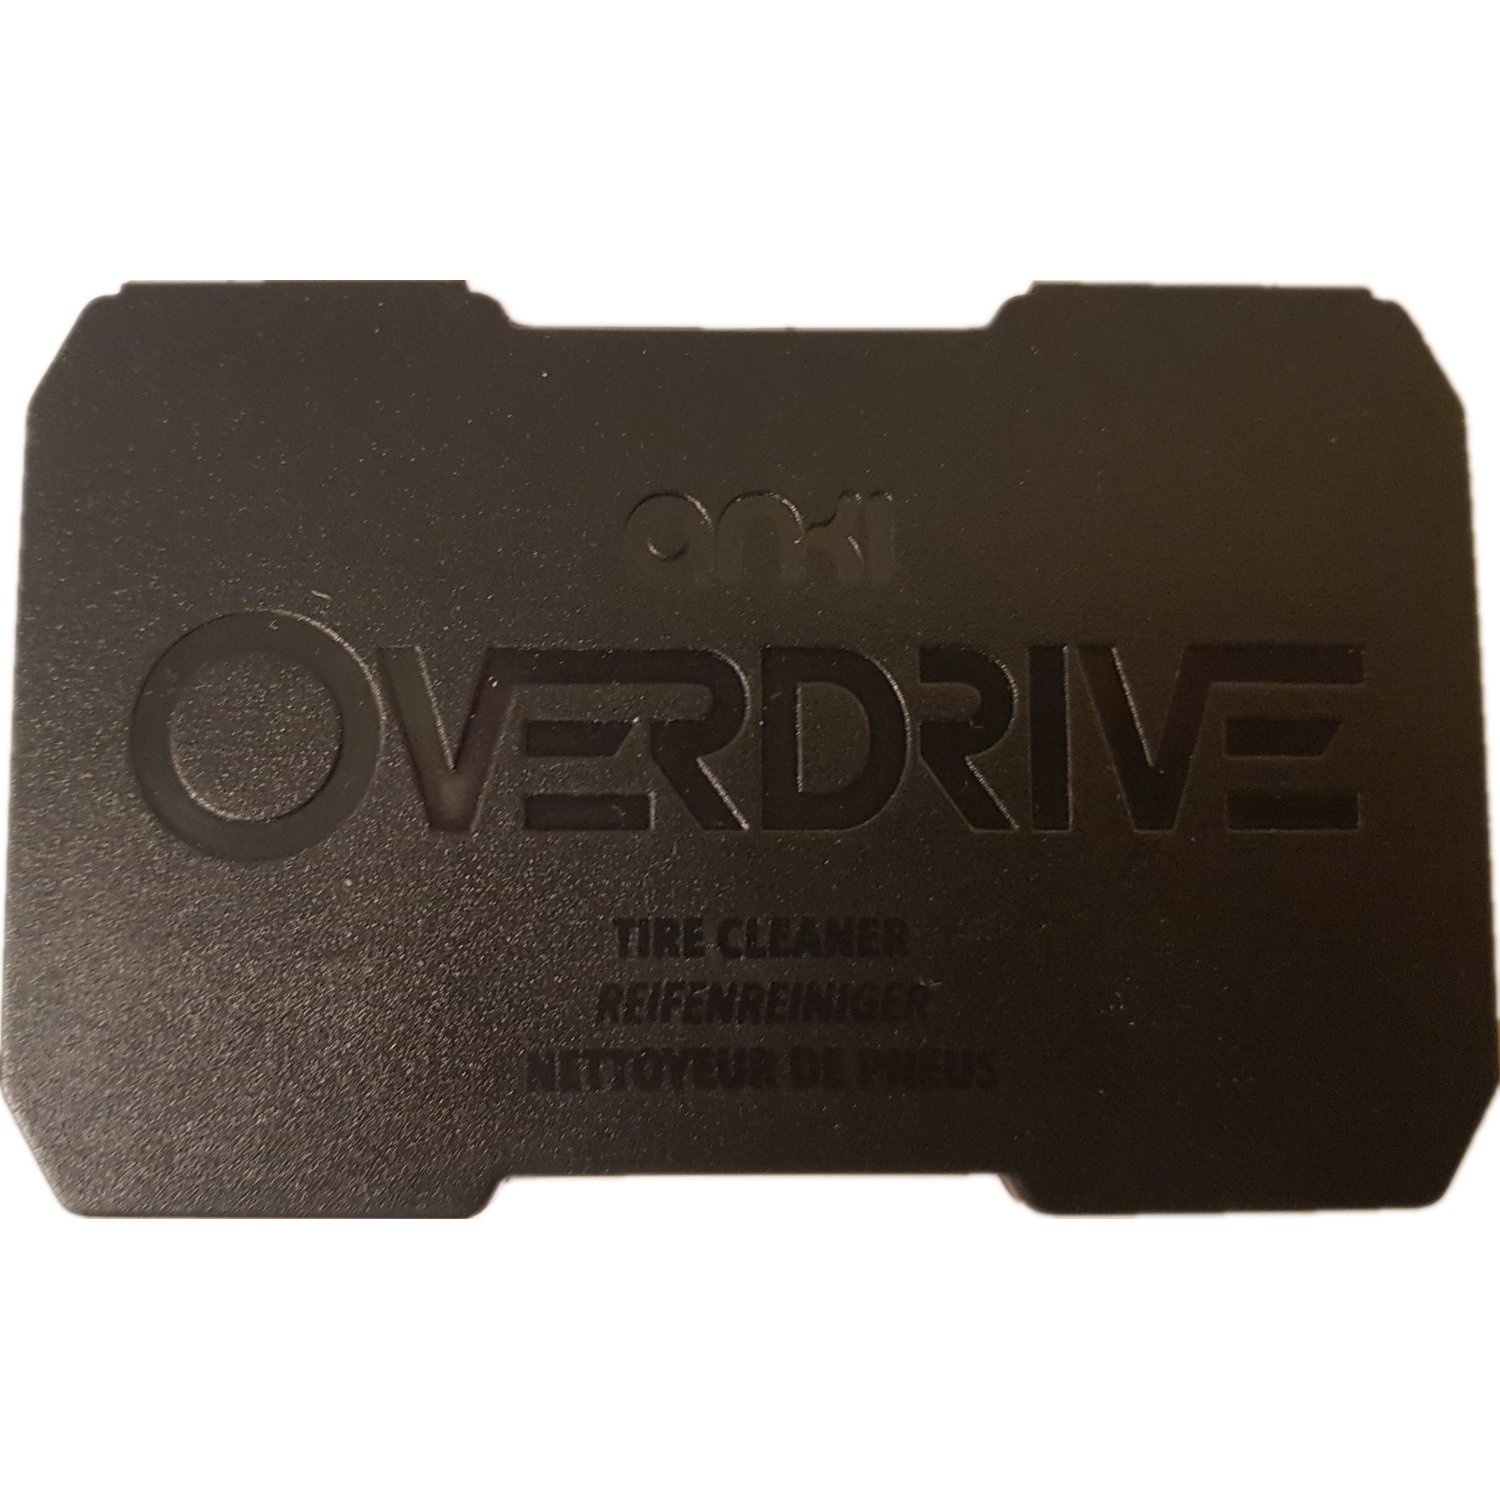 Anki Overdrive RC Car Tire Cleaner Accessorys- Refurbished